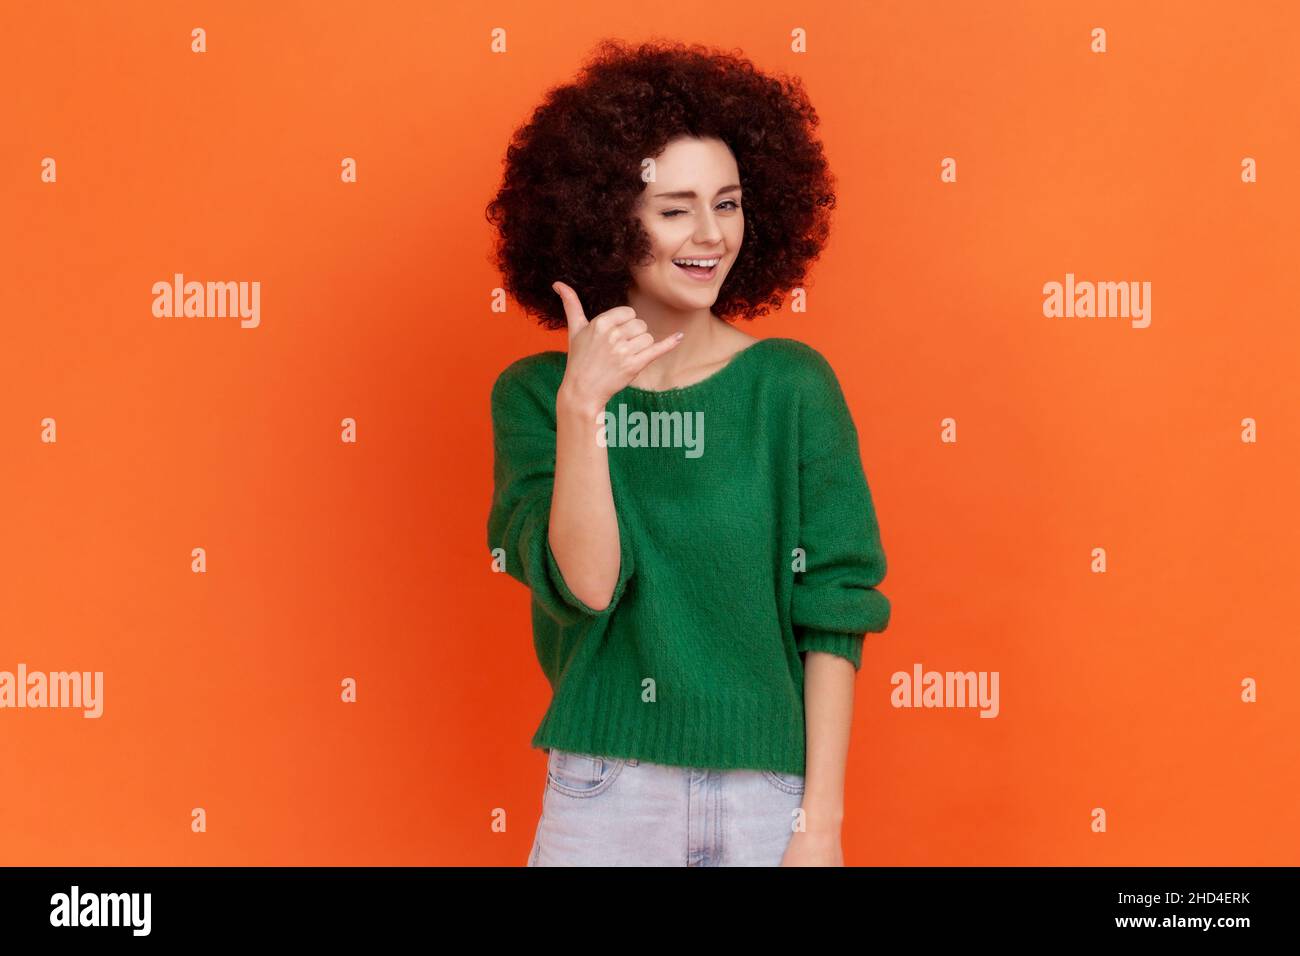 Woman with Afro hairstyle holding fingers shaped like telephone near head, communicating by phone, looking at camera with playful smile. Indoor studio shot isolated on orange background. Stock Photo